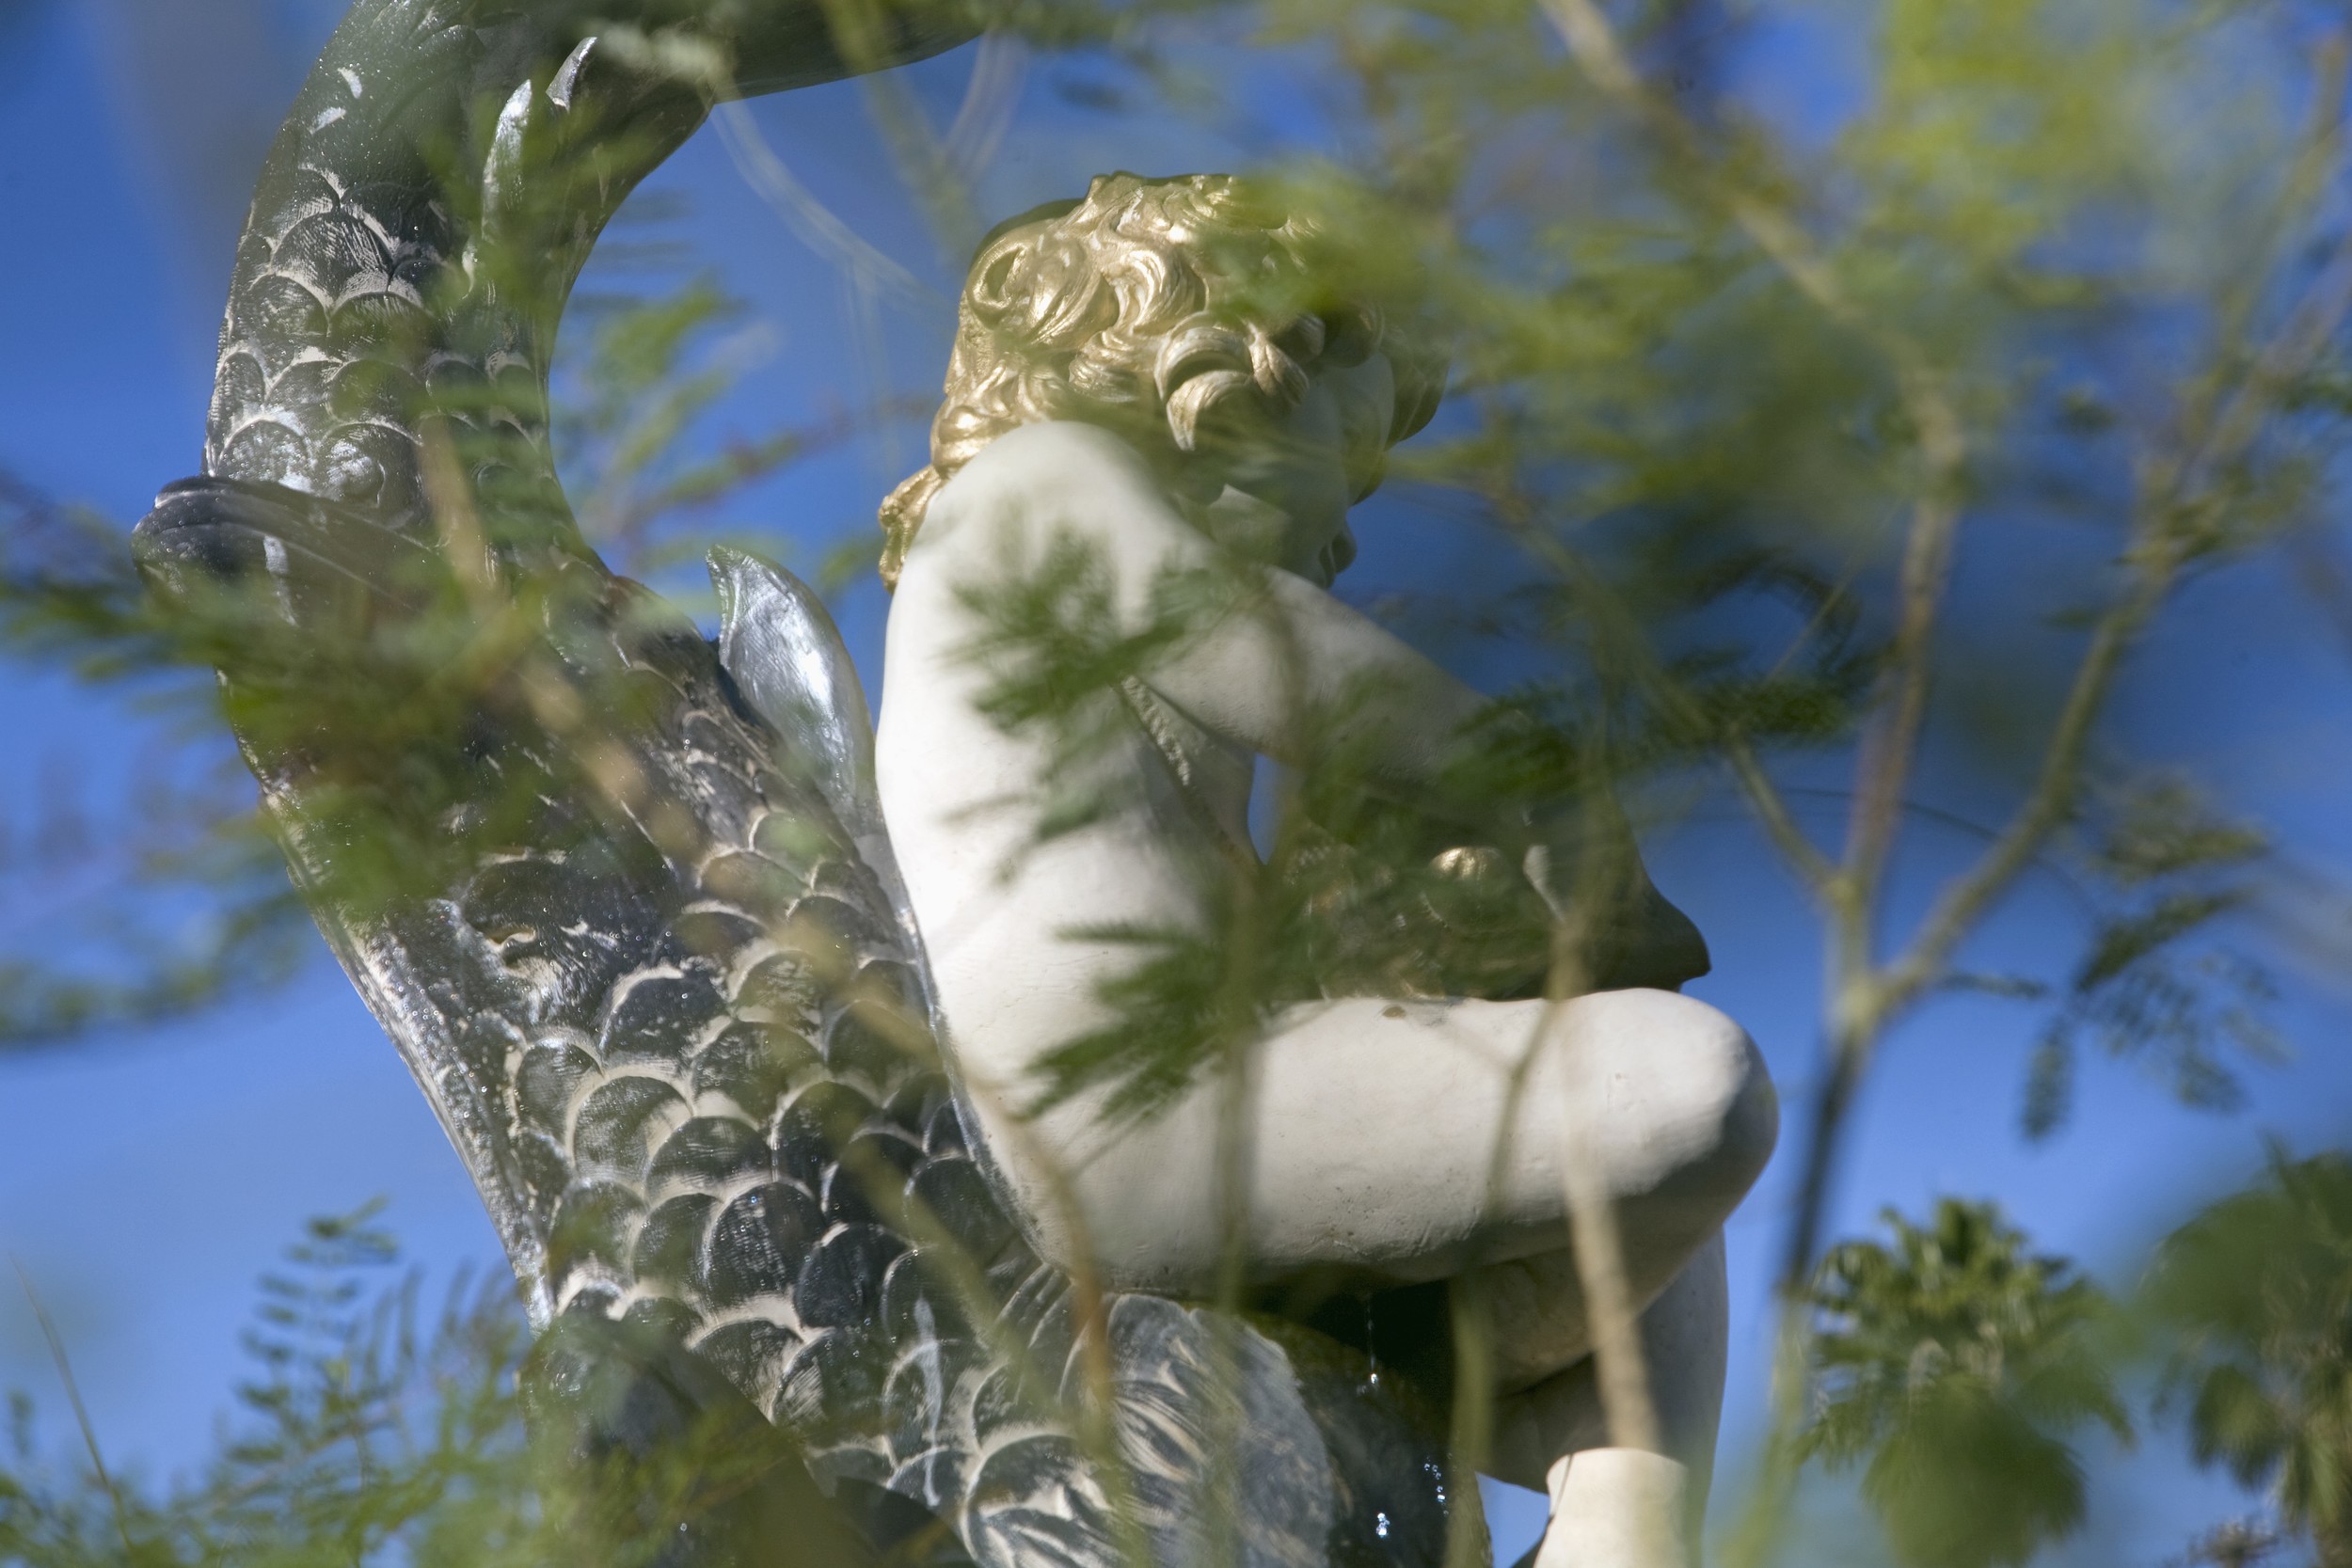   Putto and Fish,   2014   